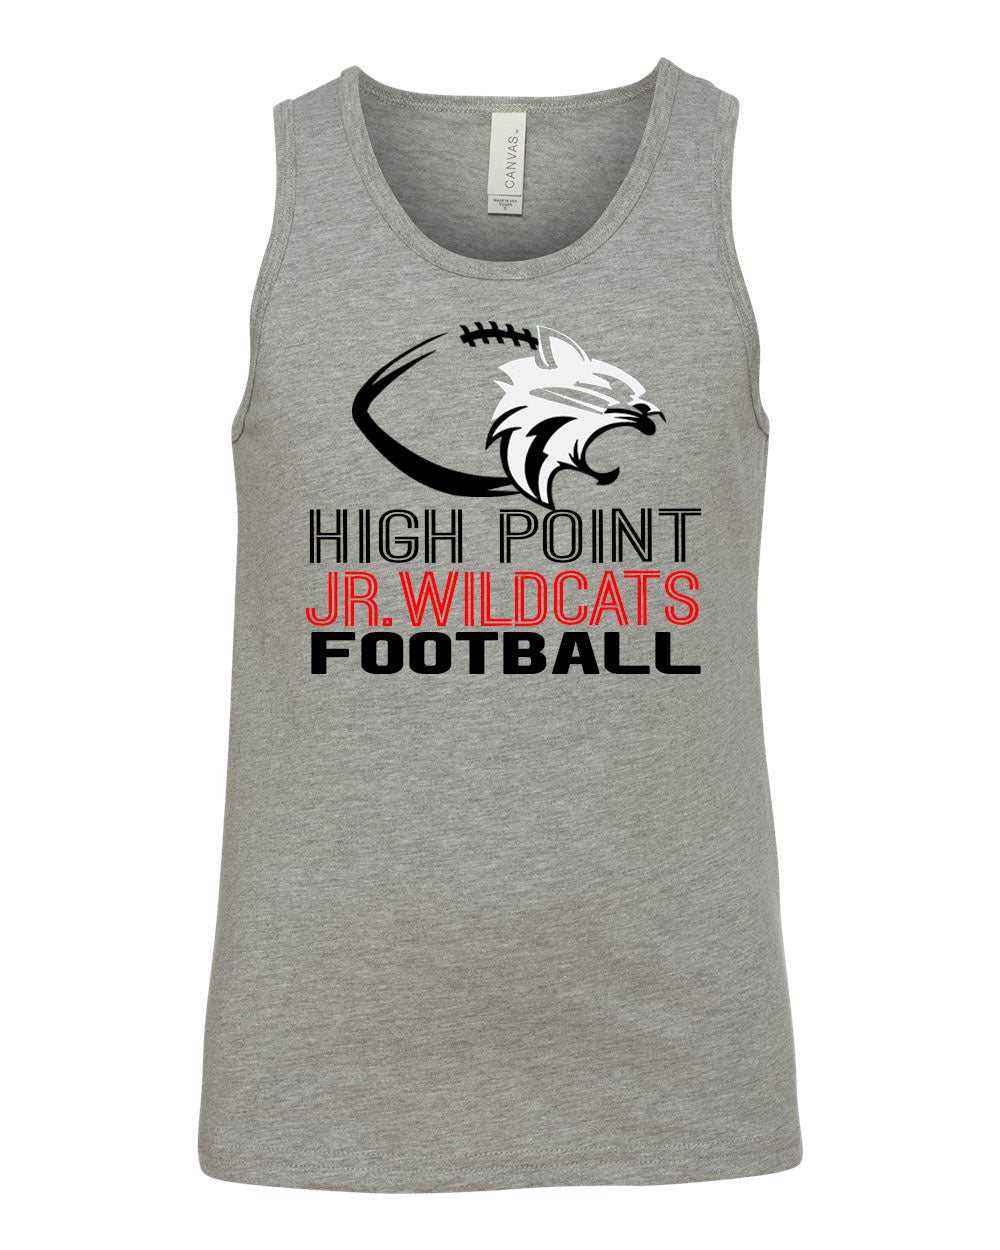 High Point Football design 1 Ladies Muscle Tank Top